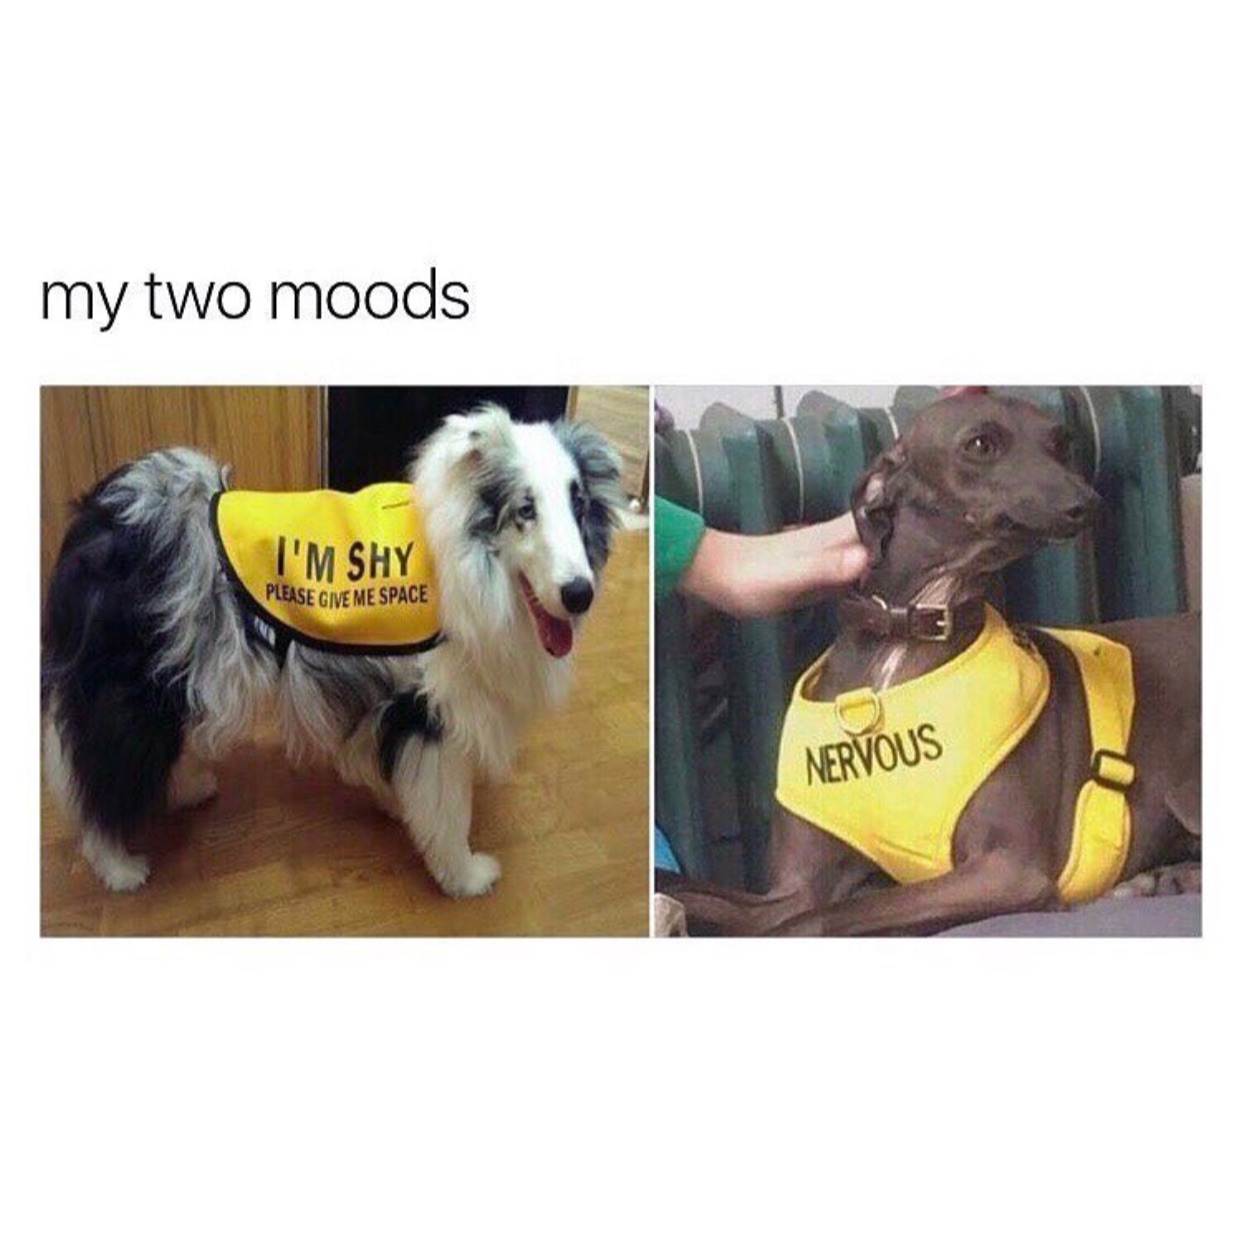 nervous meme - my two moods I'M Shy Please Give Me Space Nervous